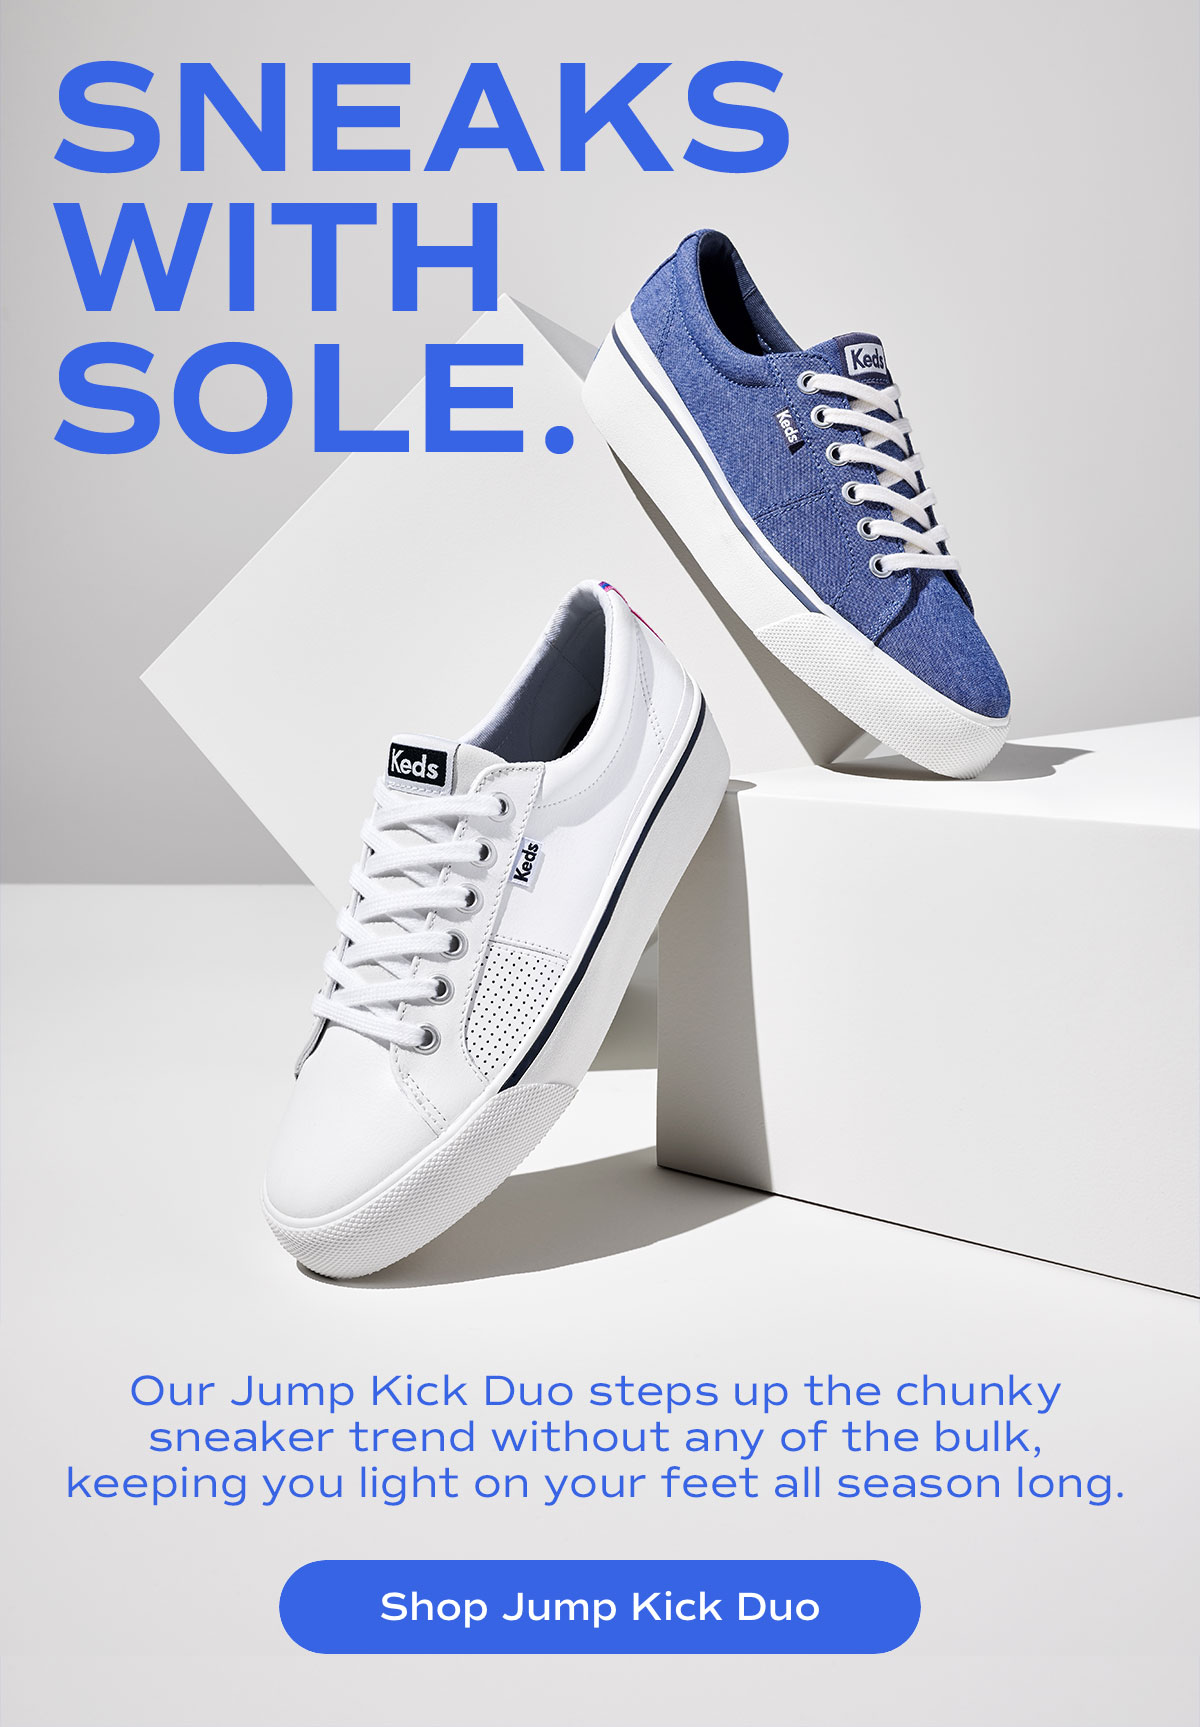 SNEAKS WITH SOLE. Our Jump Kick Duo steps up the chunky sneaker trend without any of the bulk, keeping you light on your feet all season long. | Shop Jump Kick Duo